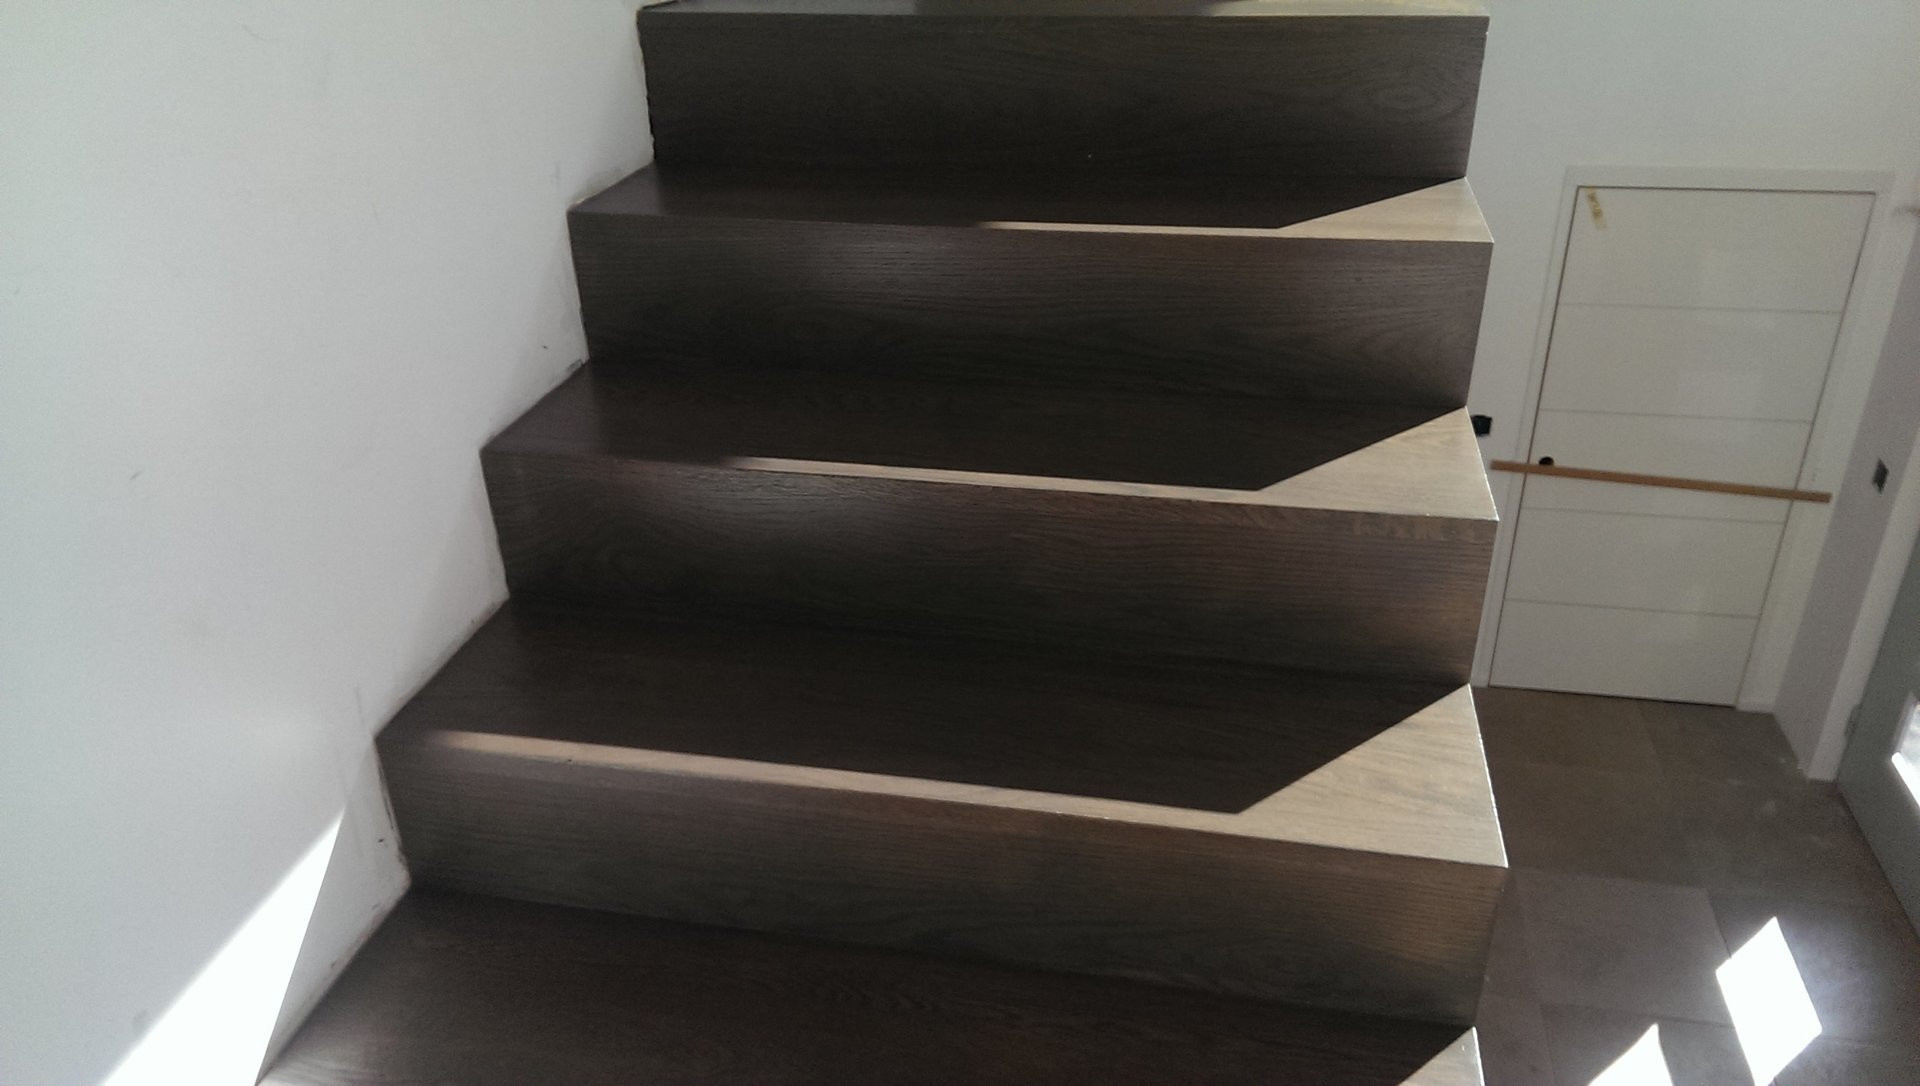 13 Nice Hardwood Floors Fairfield Ct 2024 free download hardwood floors fairfield ct of american floor service staircase gallery fairfield ct pertaining to check out our wood staircase projects